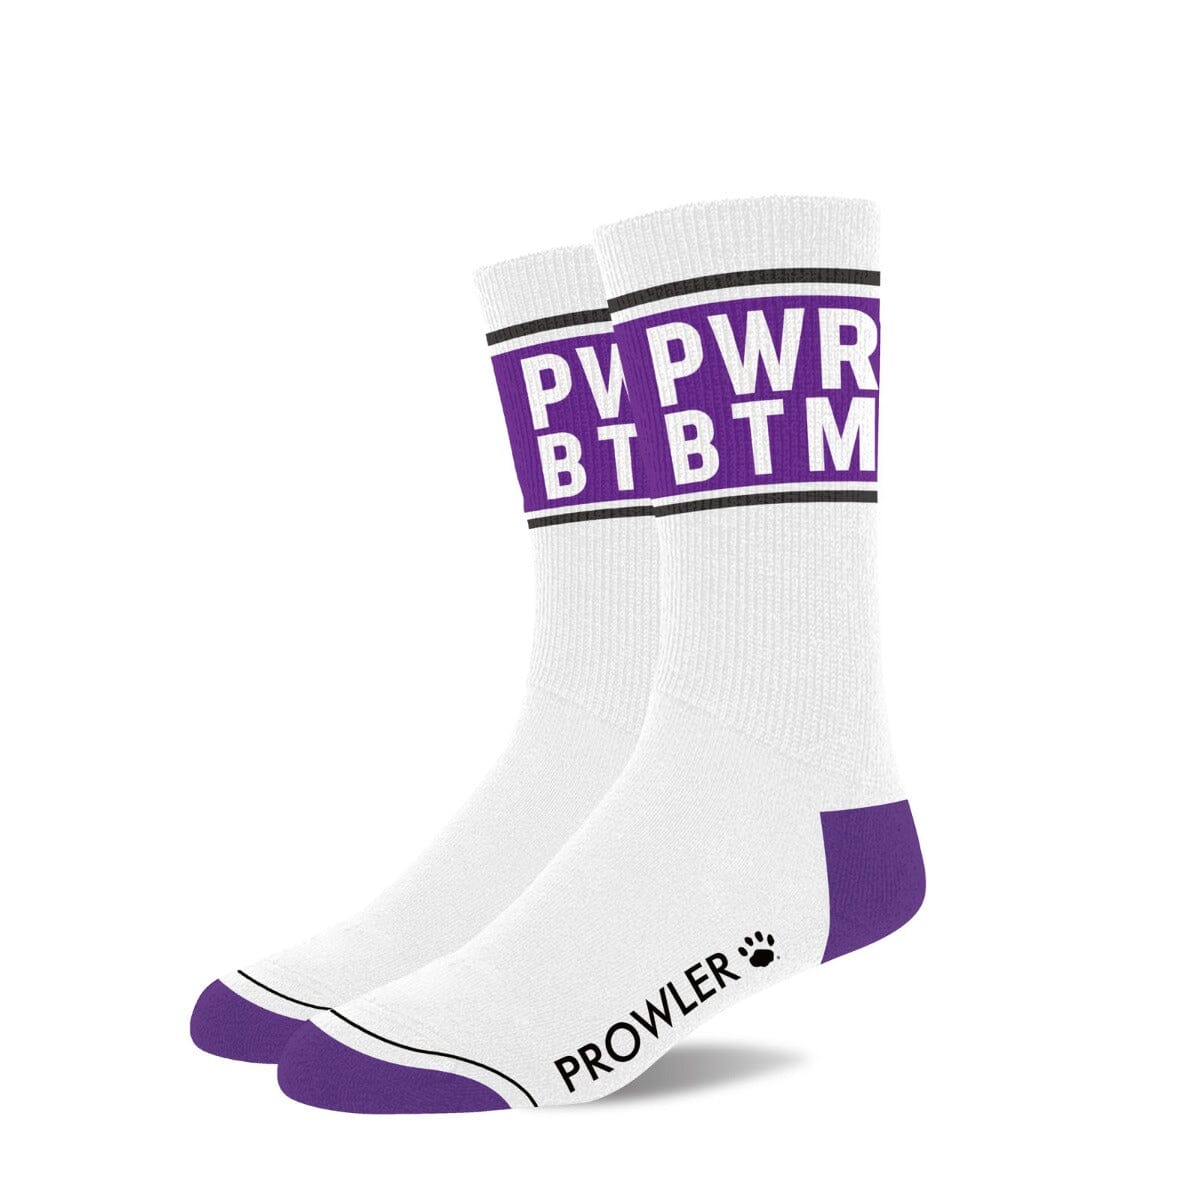 a pair of white socks with purple lettering